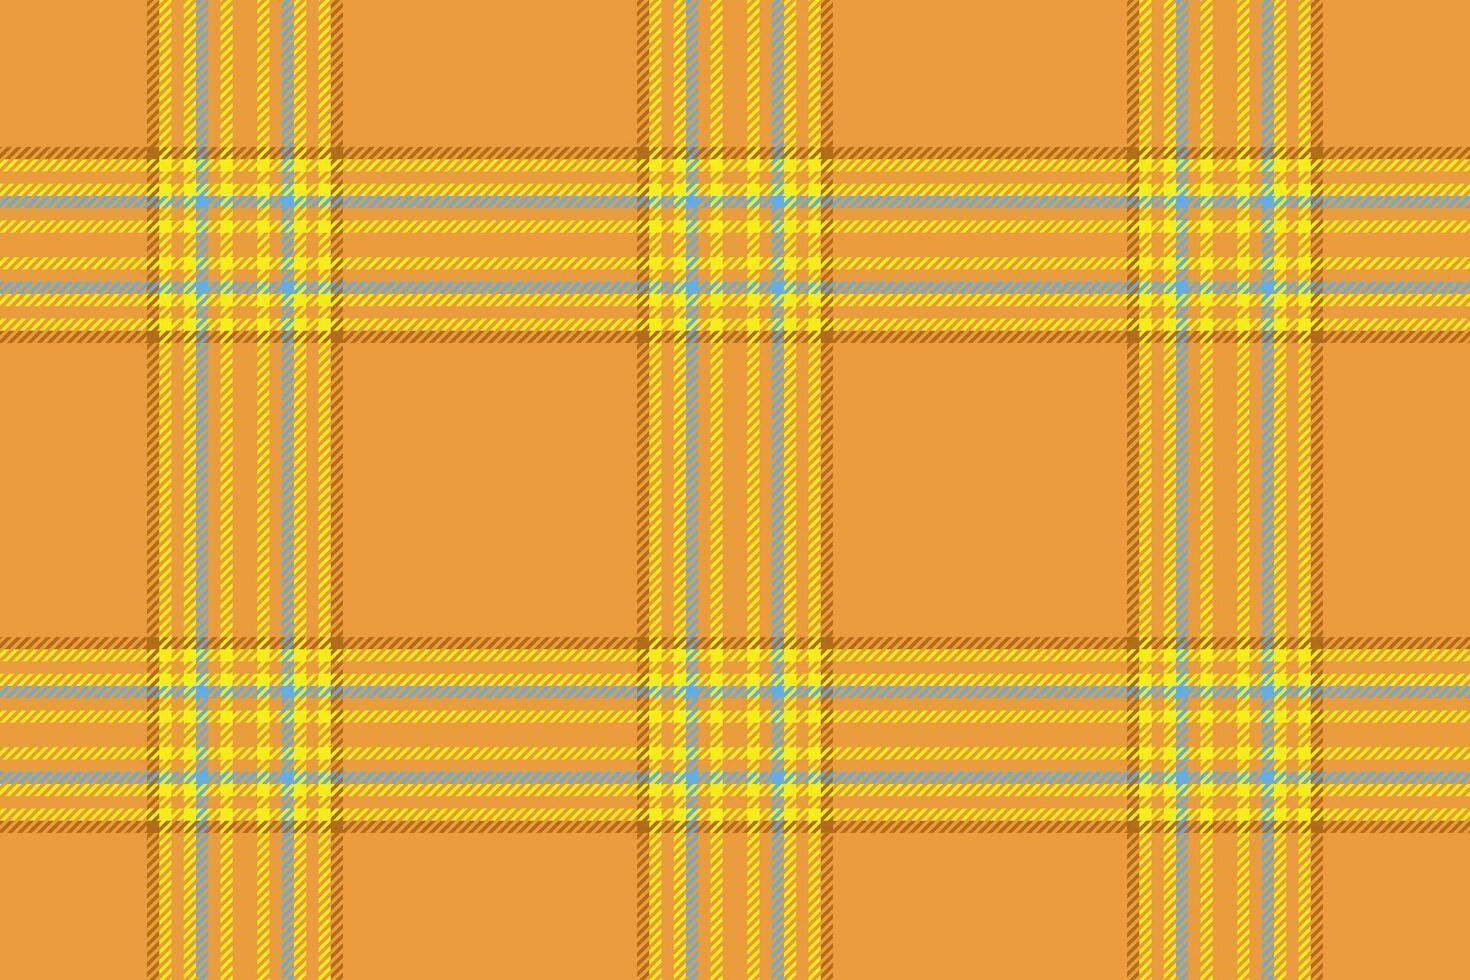 Texture plaid pattern of textile vector fabric with a check tartan background seamless.